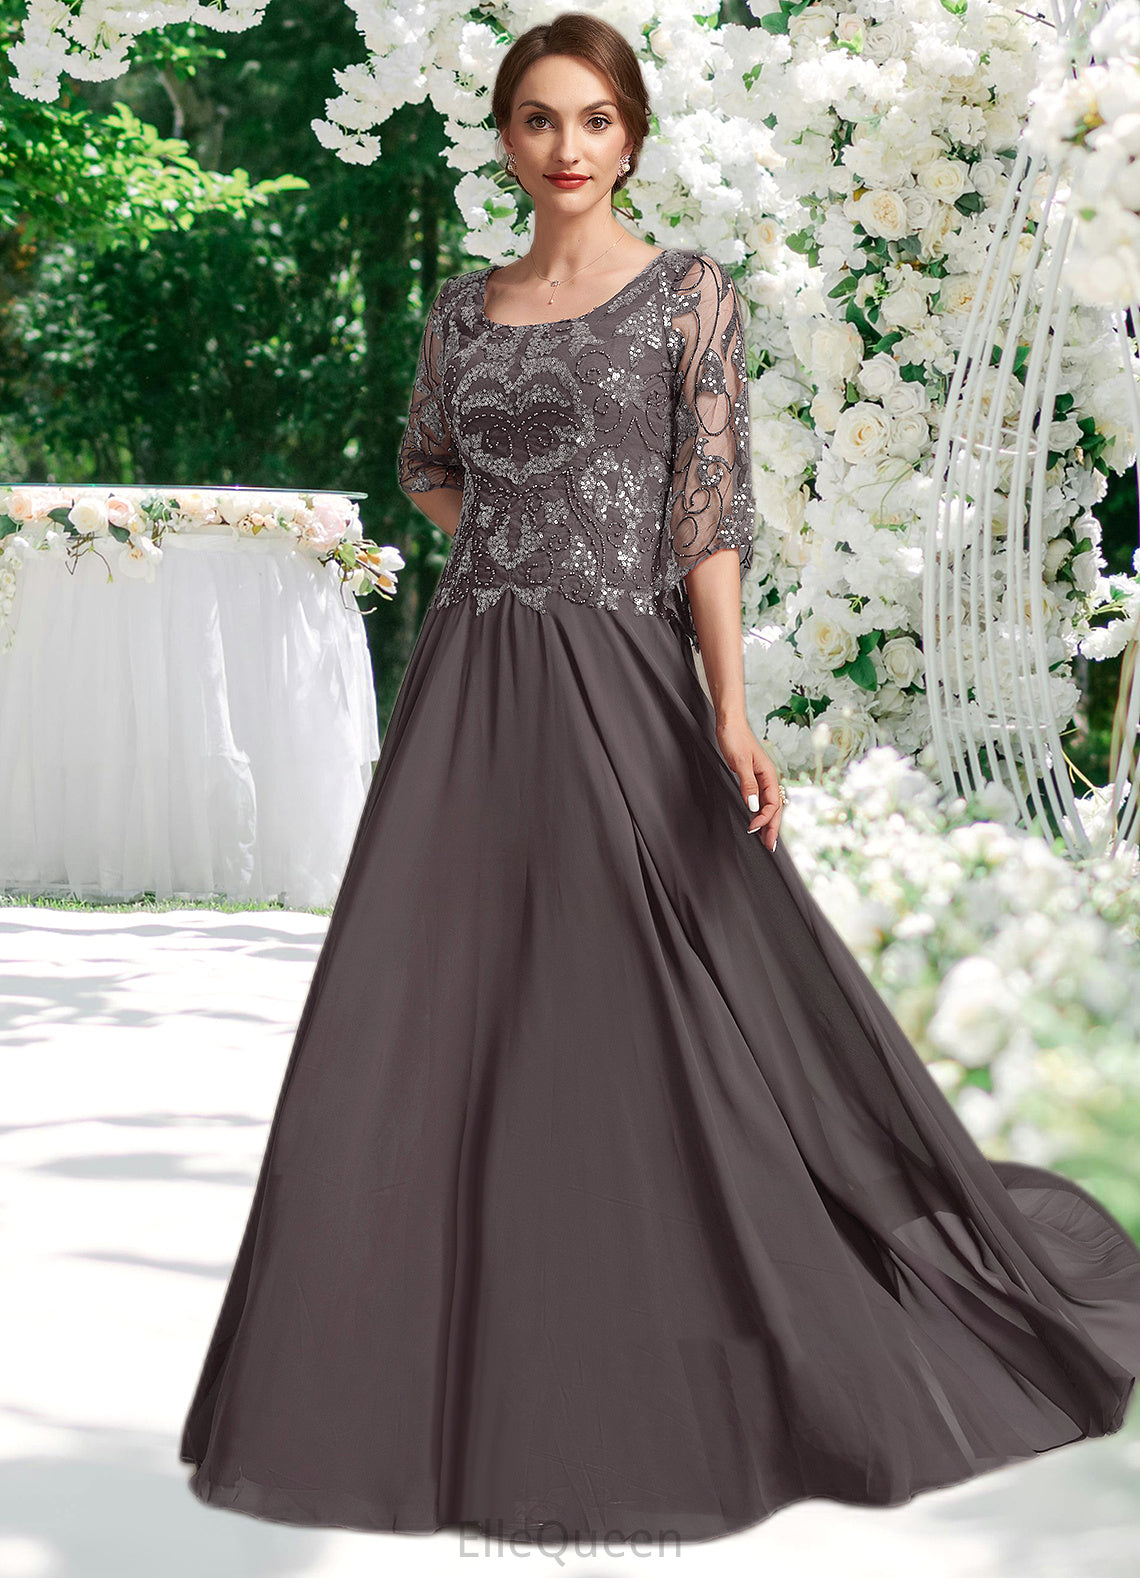 Cornelia A-Line Scoop Neck Floor-Length Chiffon Lace Mother of the Bride Dress With Beading Sequins DG126P0015036